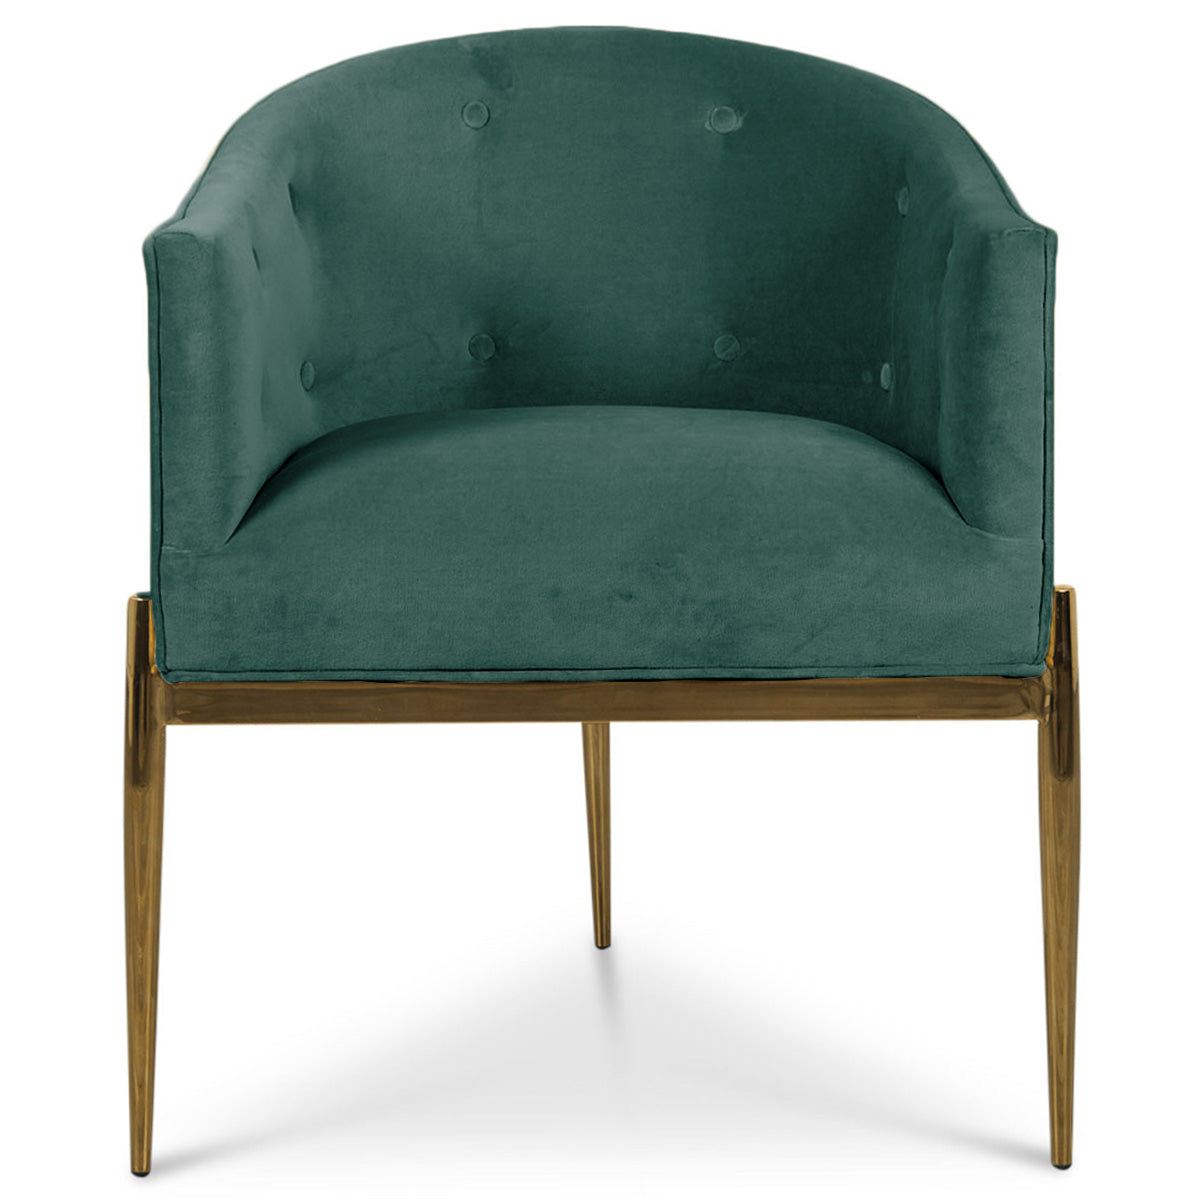 Art Deco Dining Chair in Hunter Green